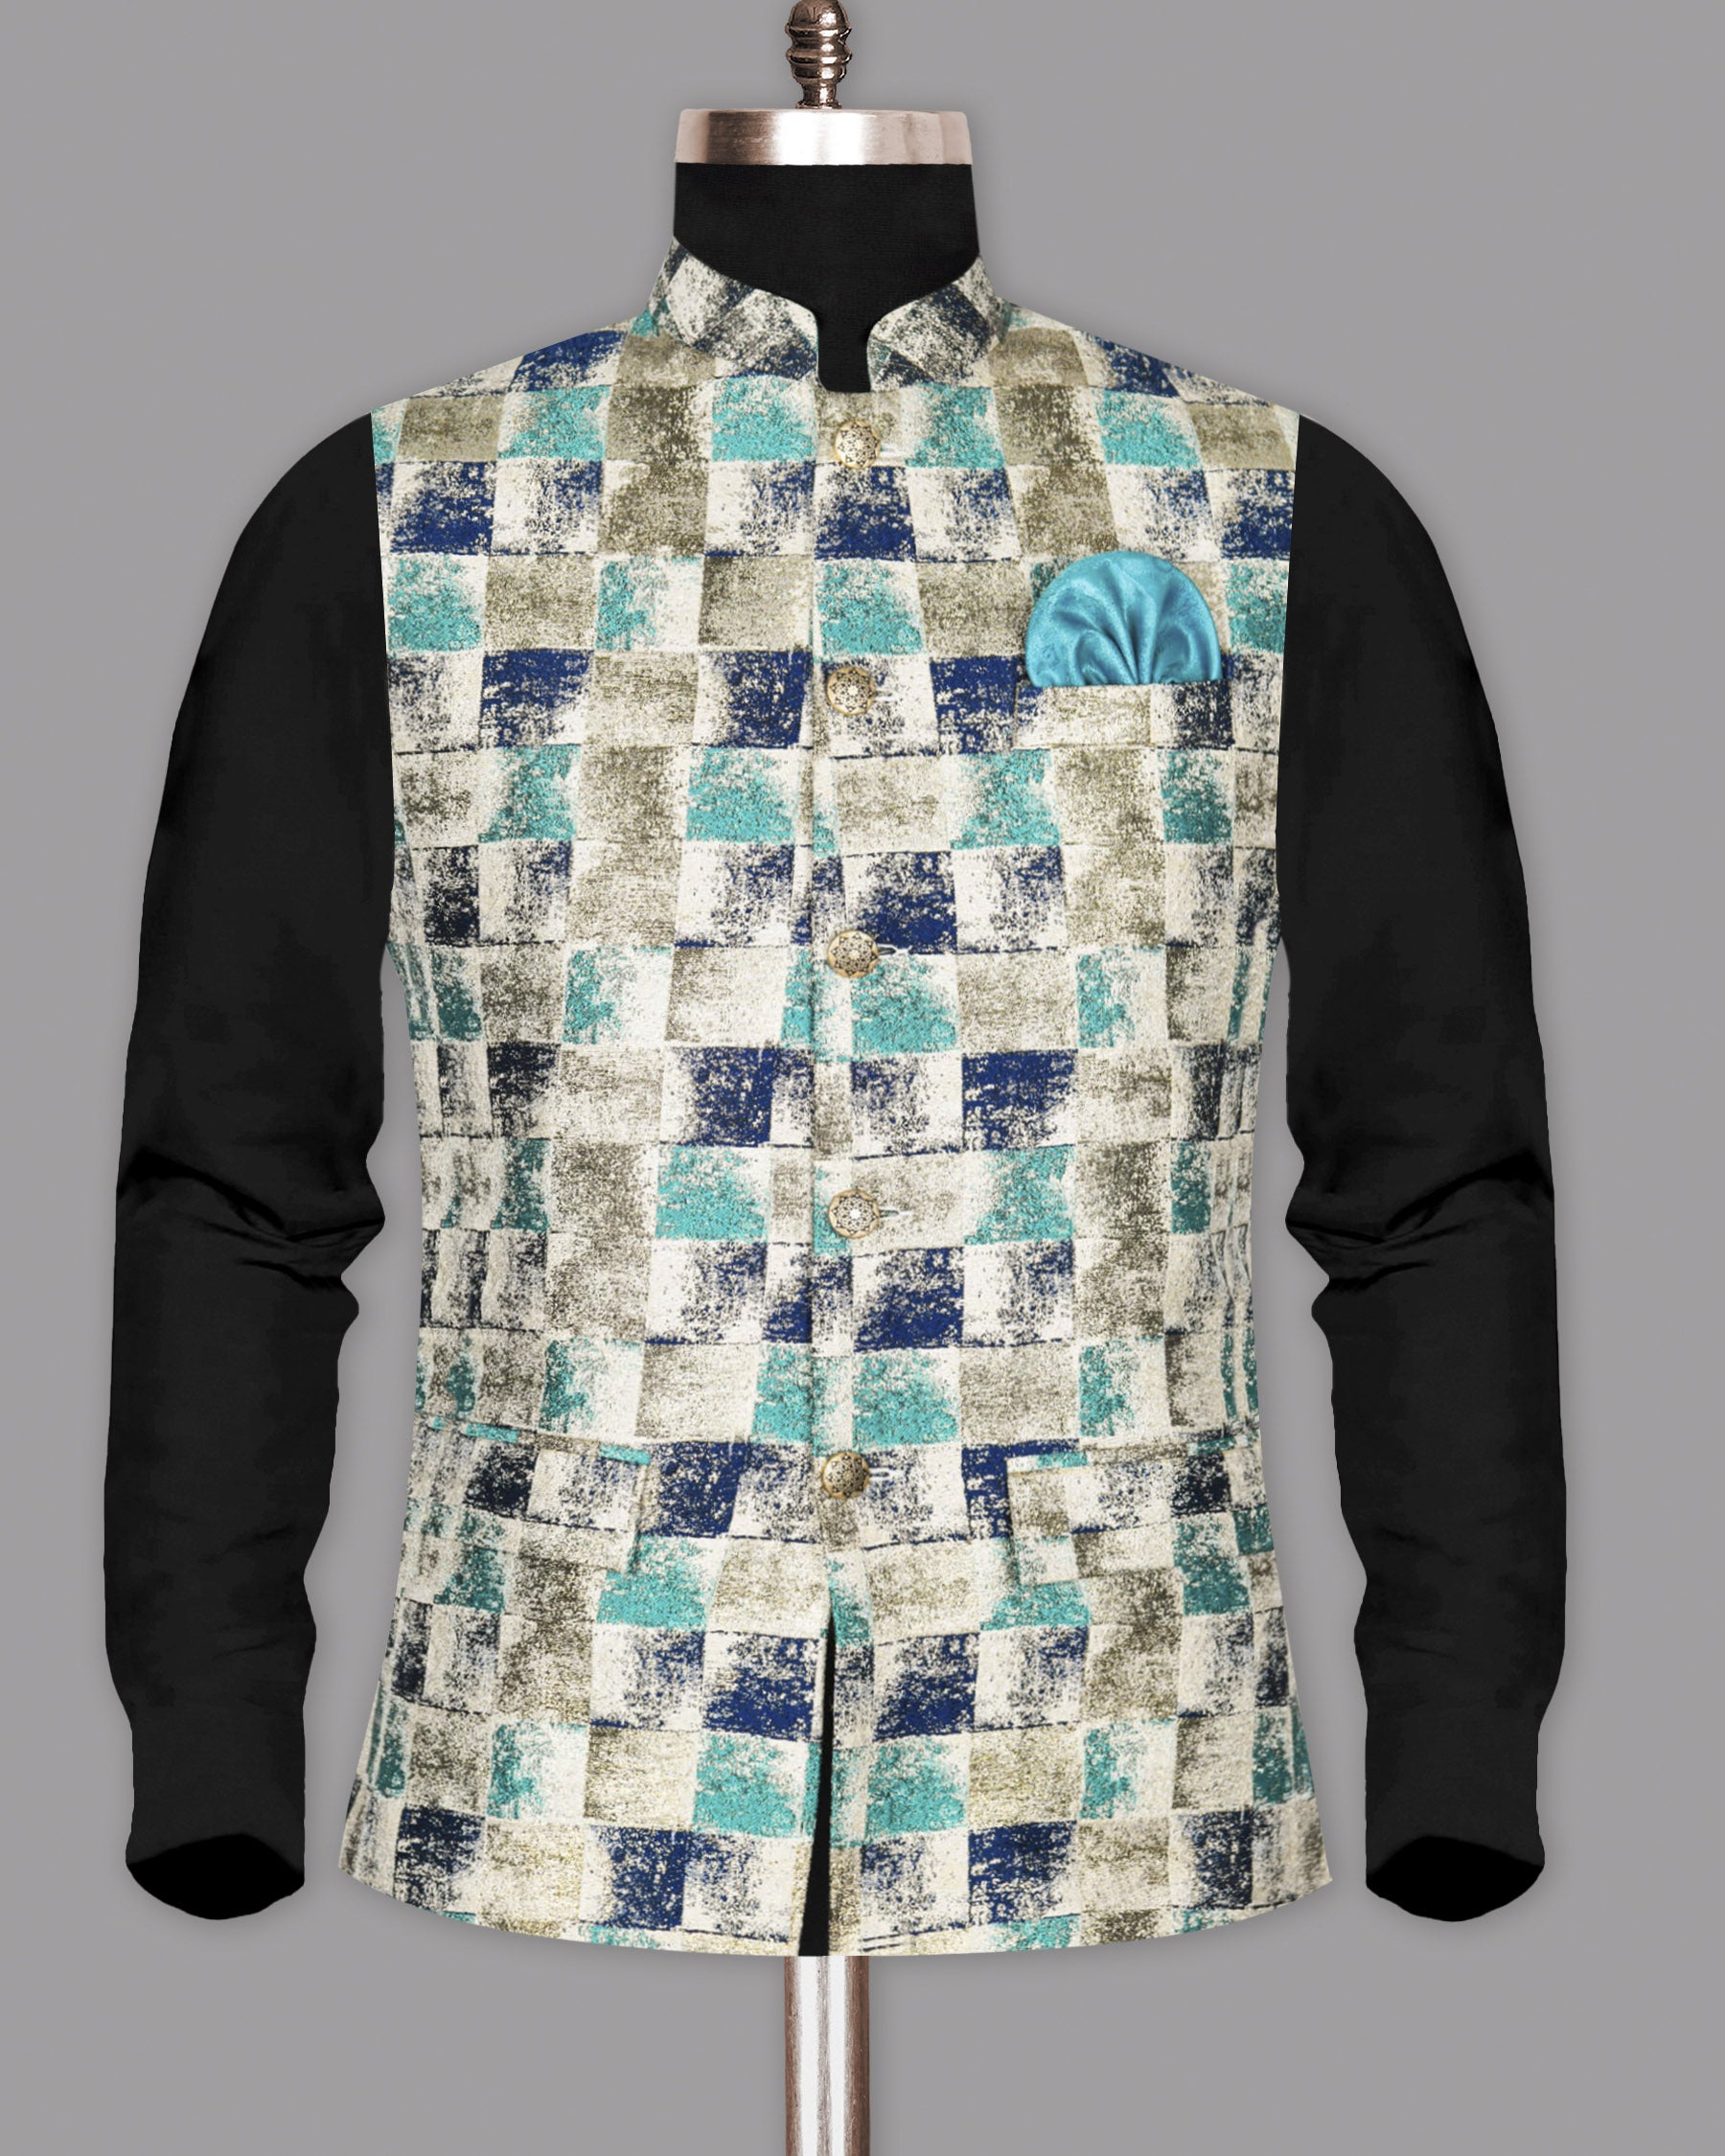 Cream with Colourful Fading Box Jacquard Patterned Designer Waistcoat